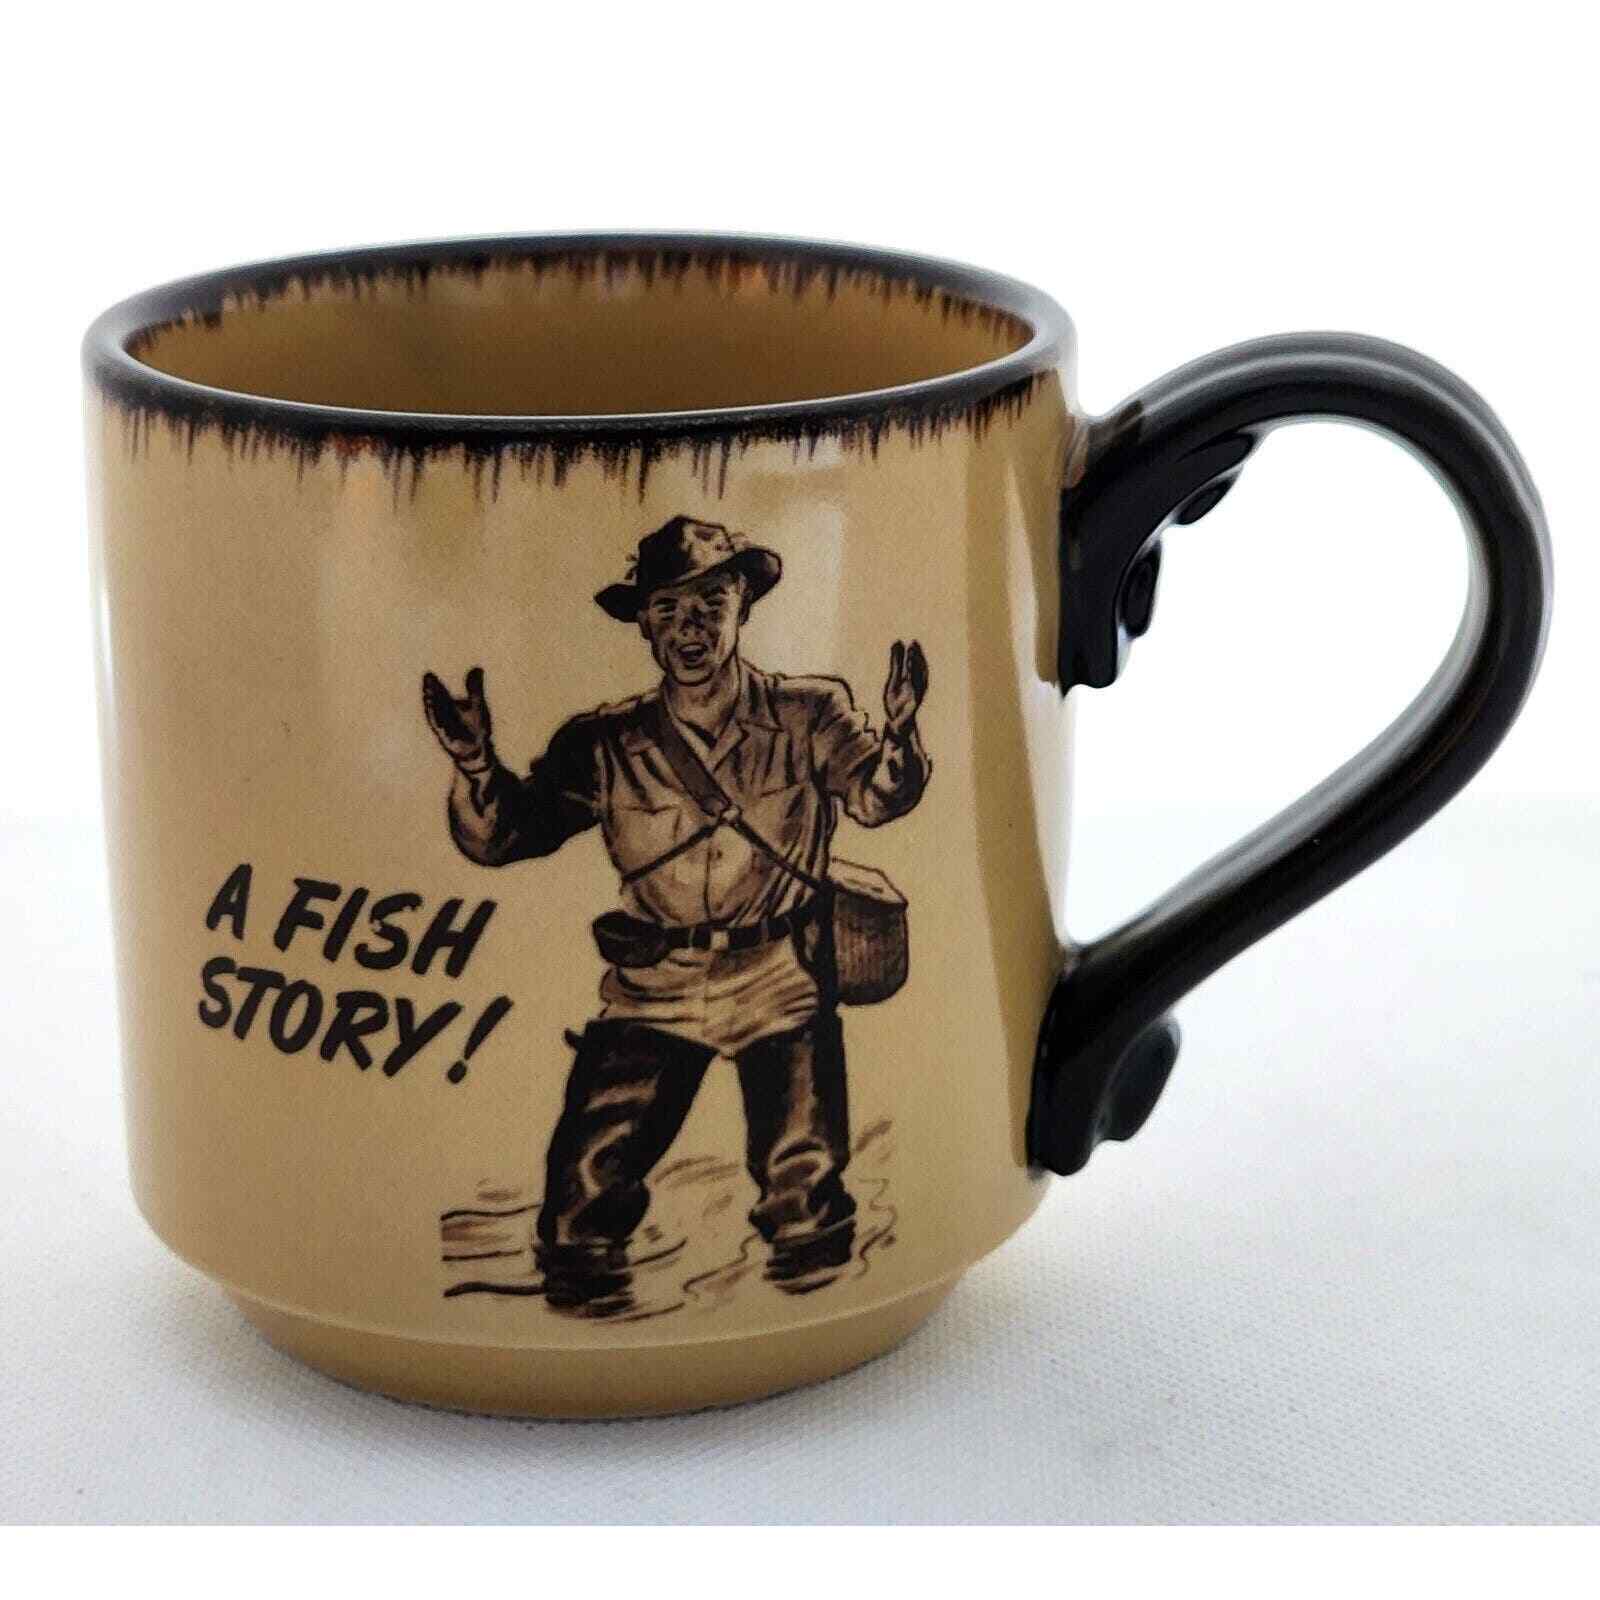 MUG-CUP-VINTAGE-IRON IN THE FIRE-STEVE HANSEN ARTIST-FISHING-UNIQUE GIFT-NOVELTY